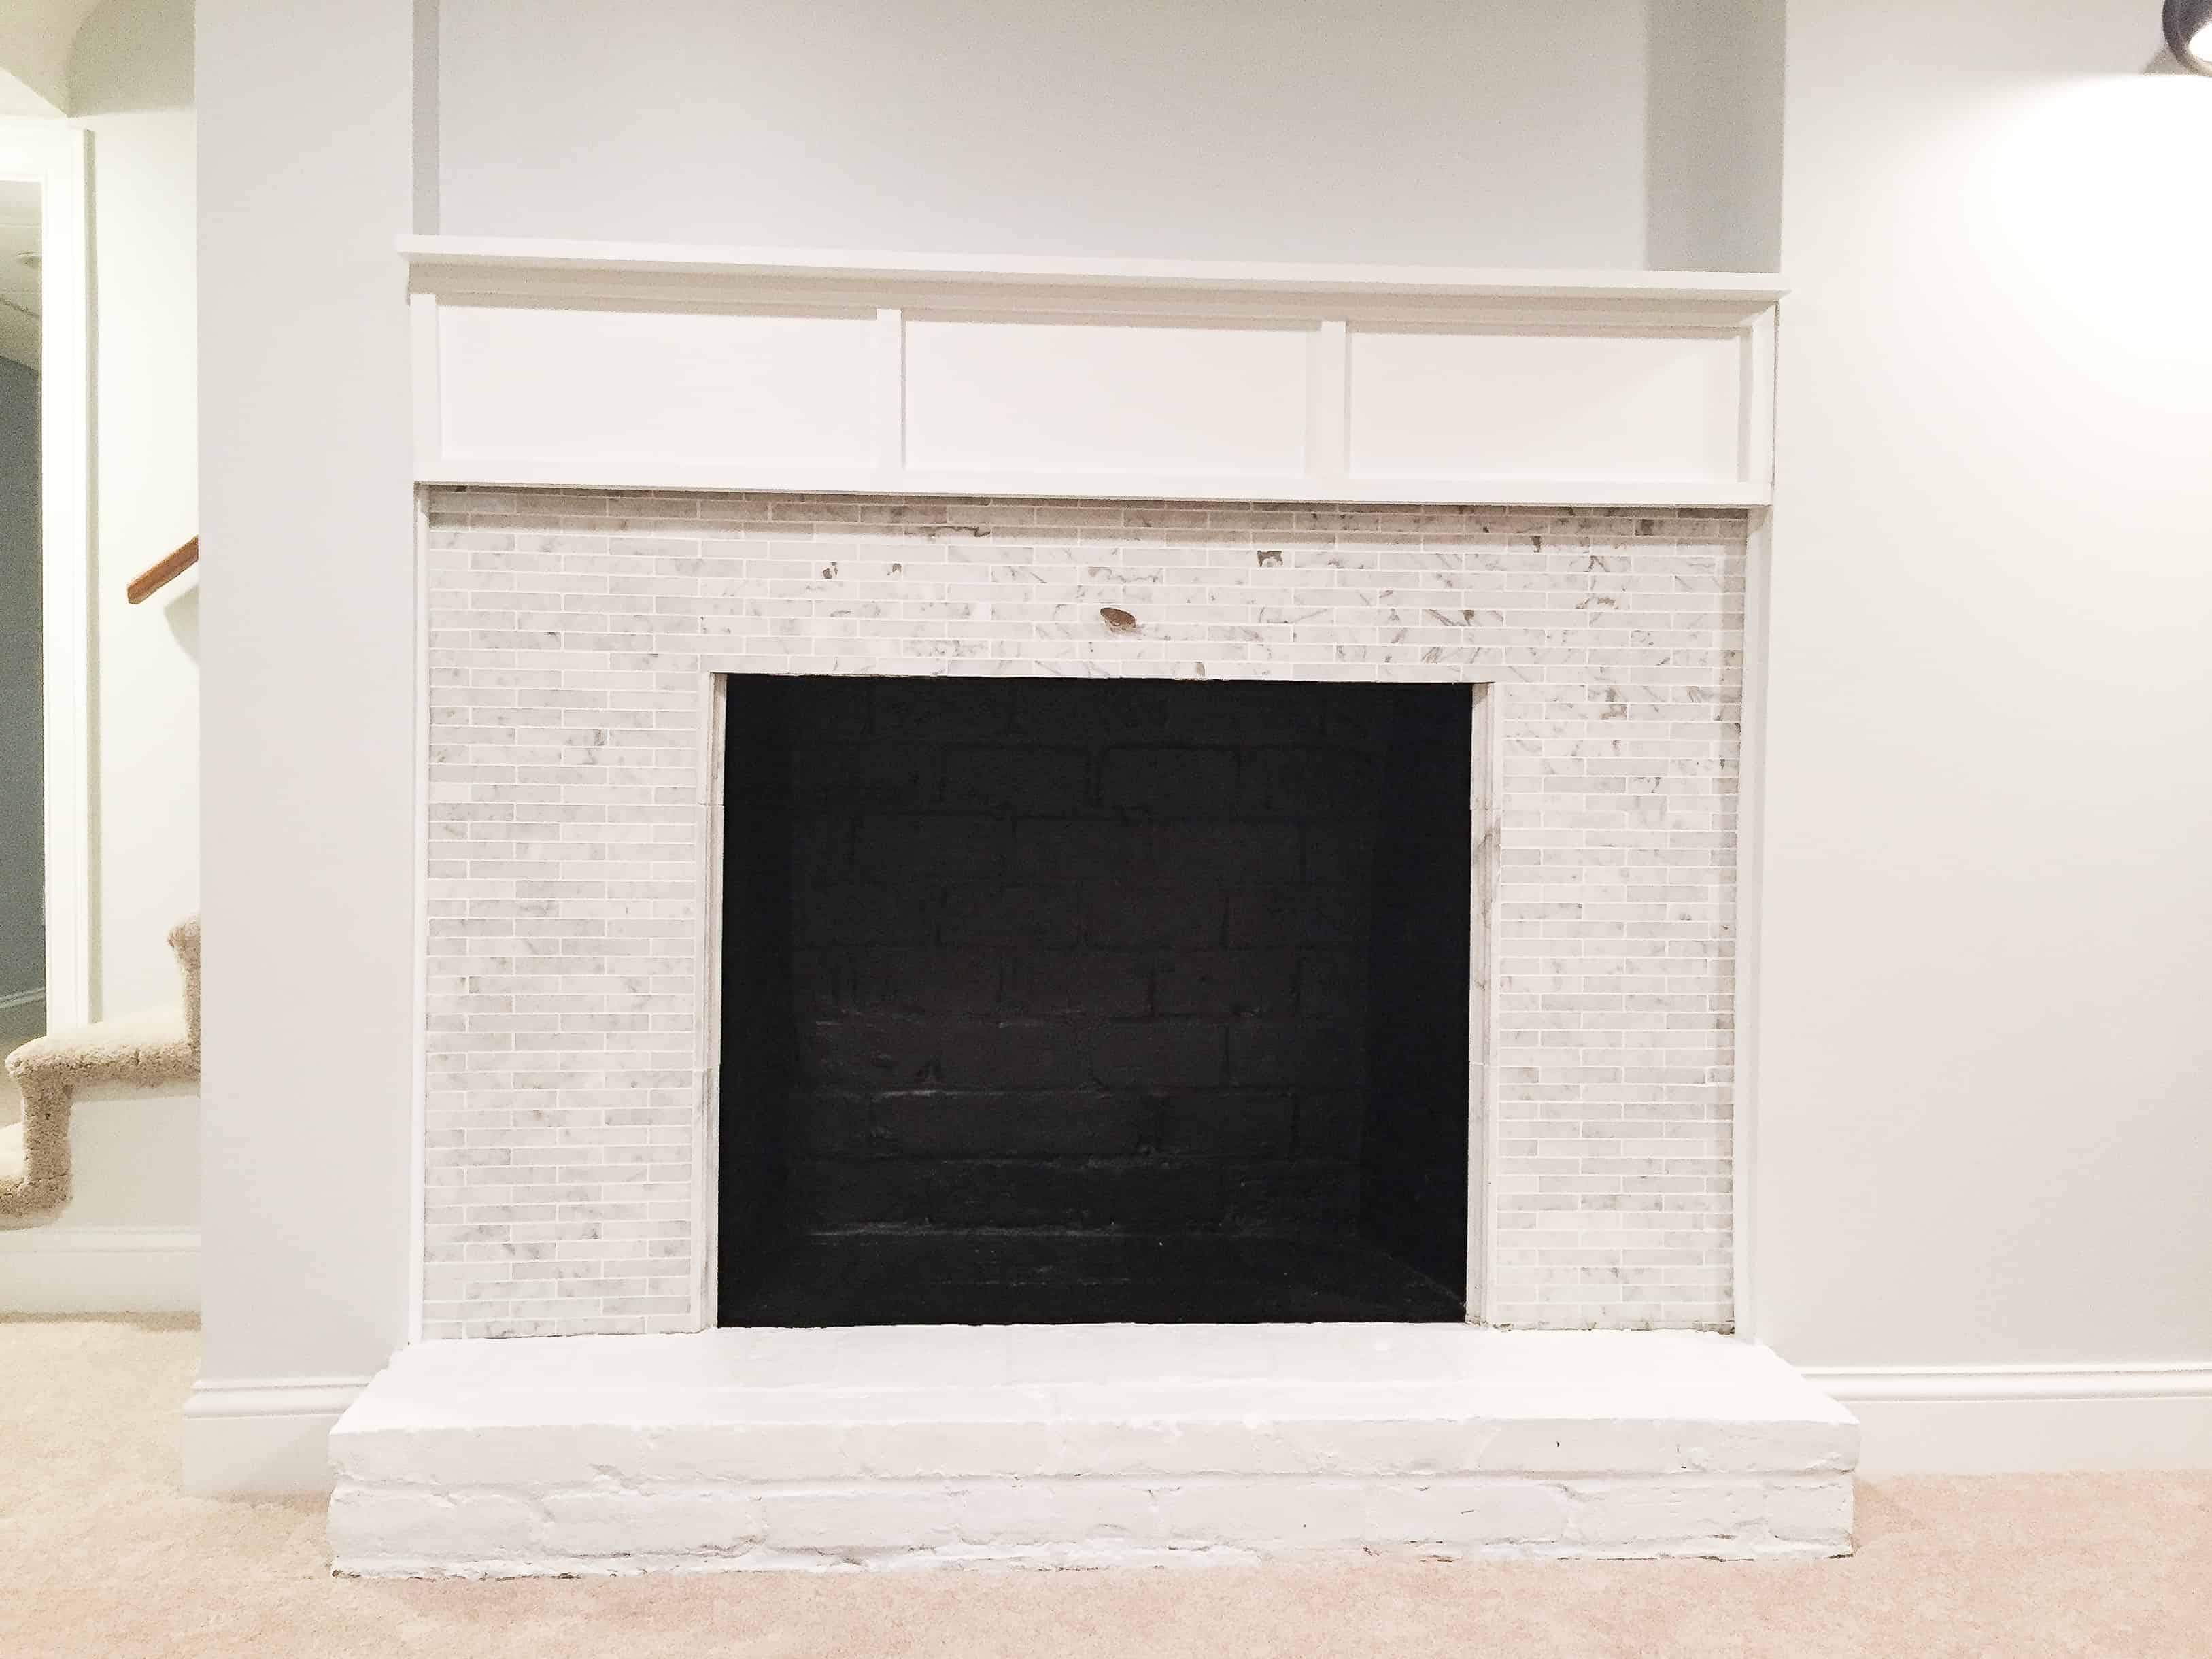 A fireplace with a white mantel, black firebox, white painted stone hearth and grey and white tile surround